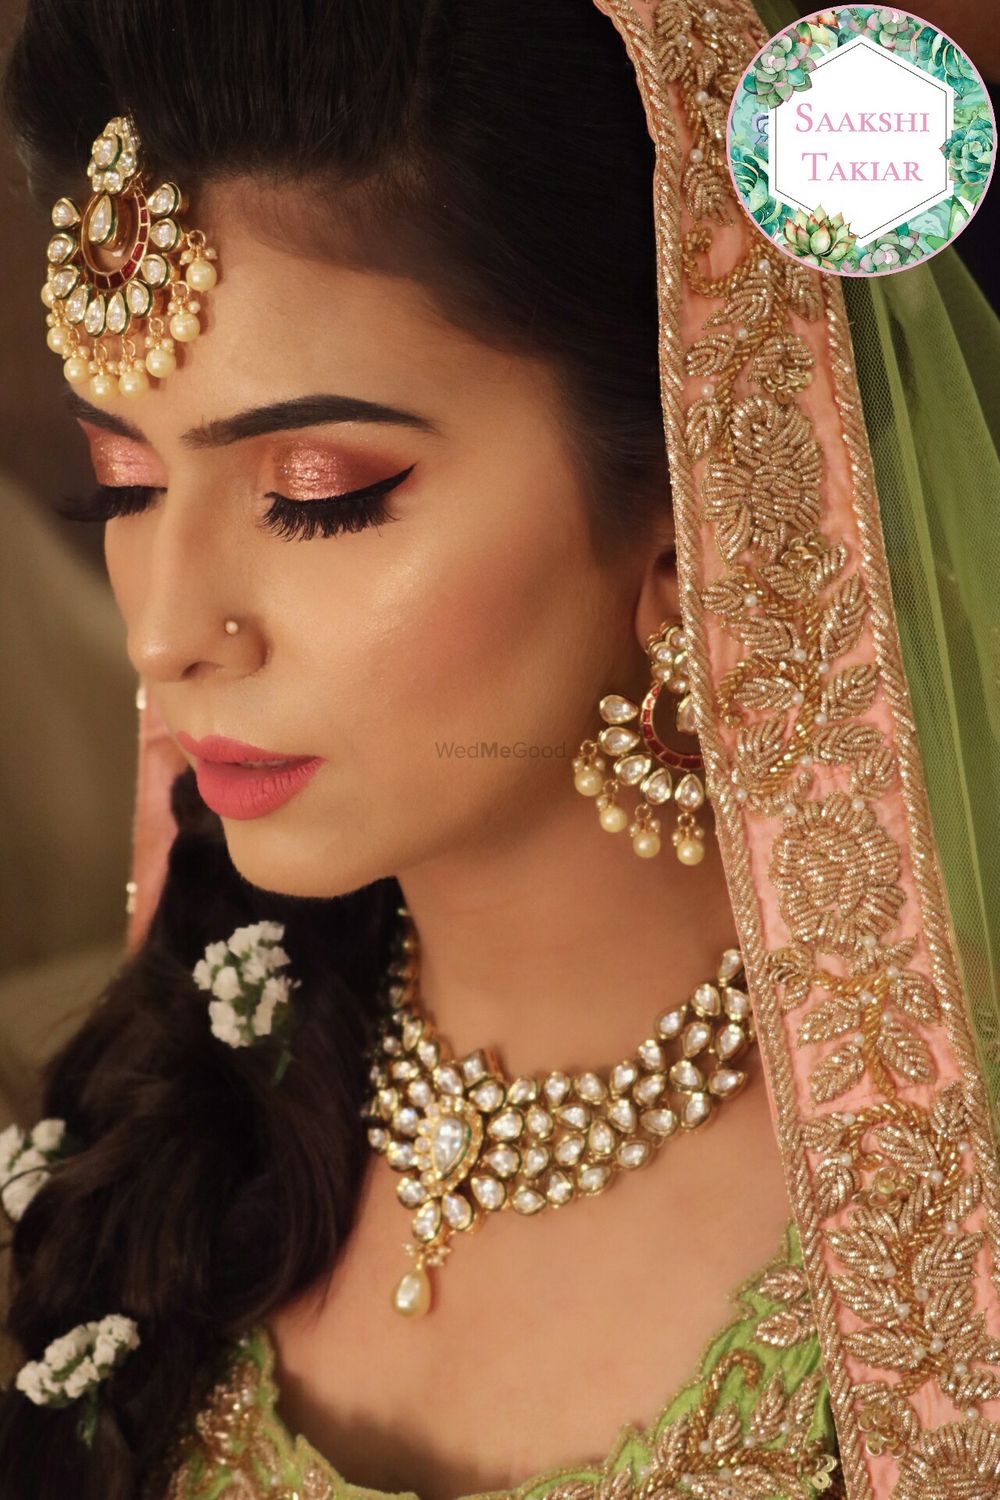 Photo From Dakshi - The Gorgeous Muslim Bride - By Makeup by Saakshi Takiar